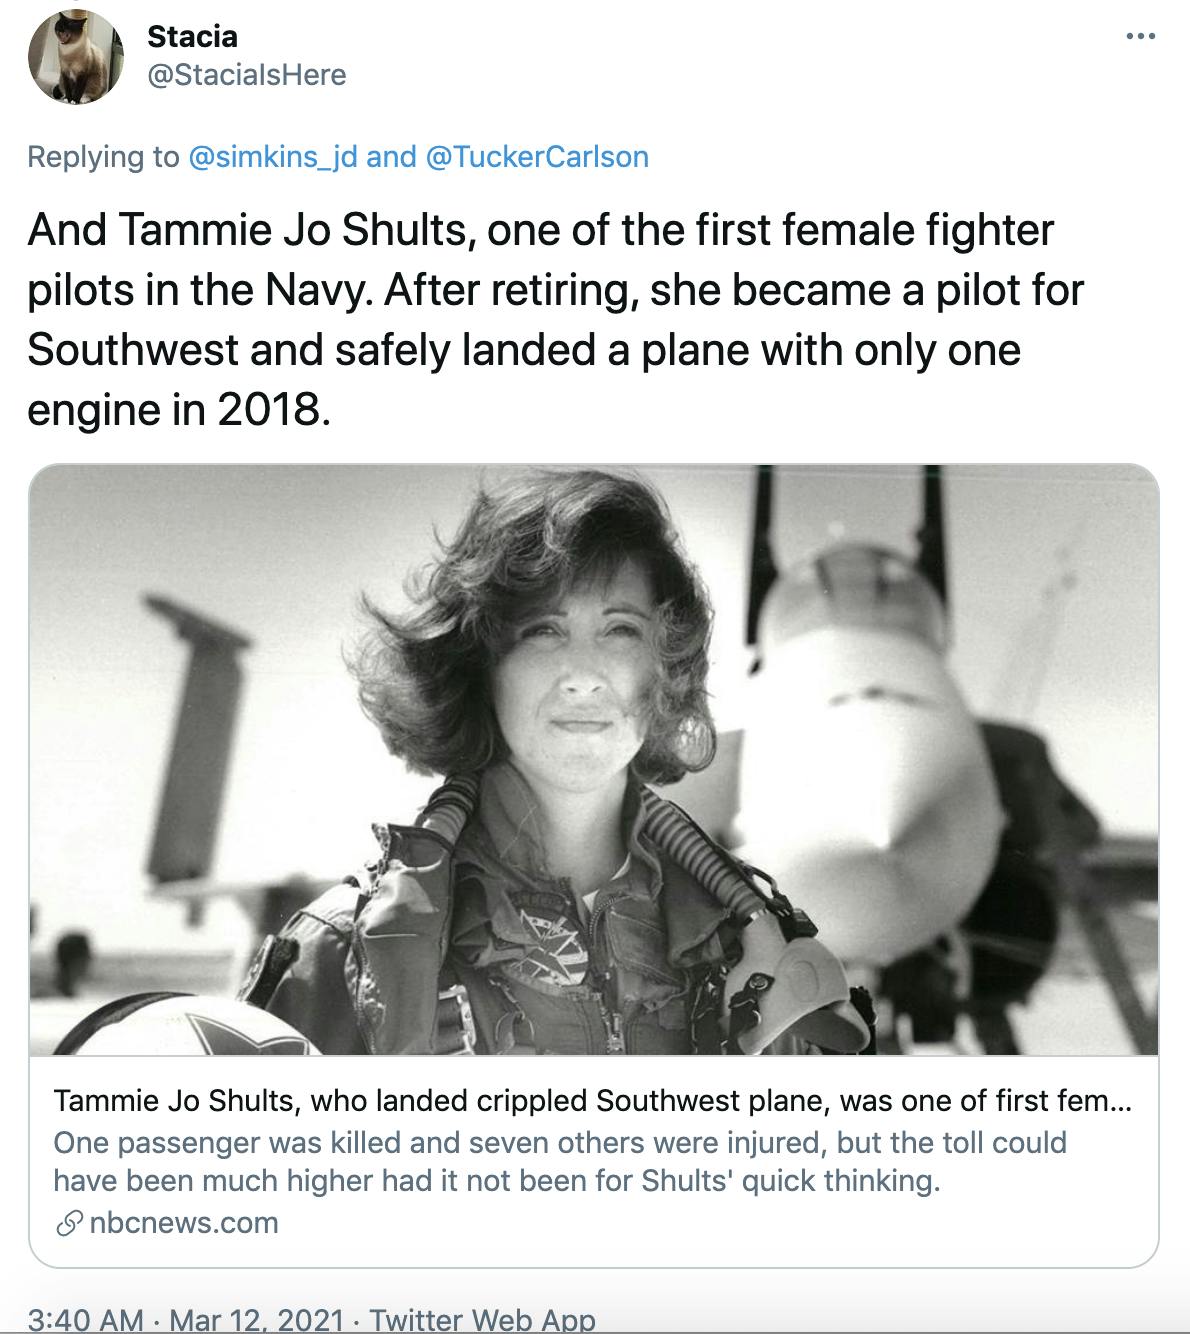 And Tammie Jo Shults, one of the first female fighter pilots in the Navy. After retiring, she became a pilot for Southwest and safely landed a plane with only one engine in 2018.